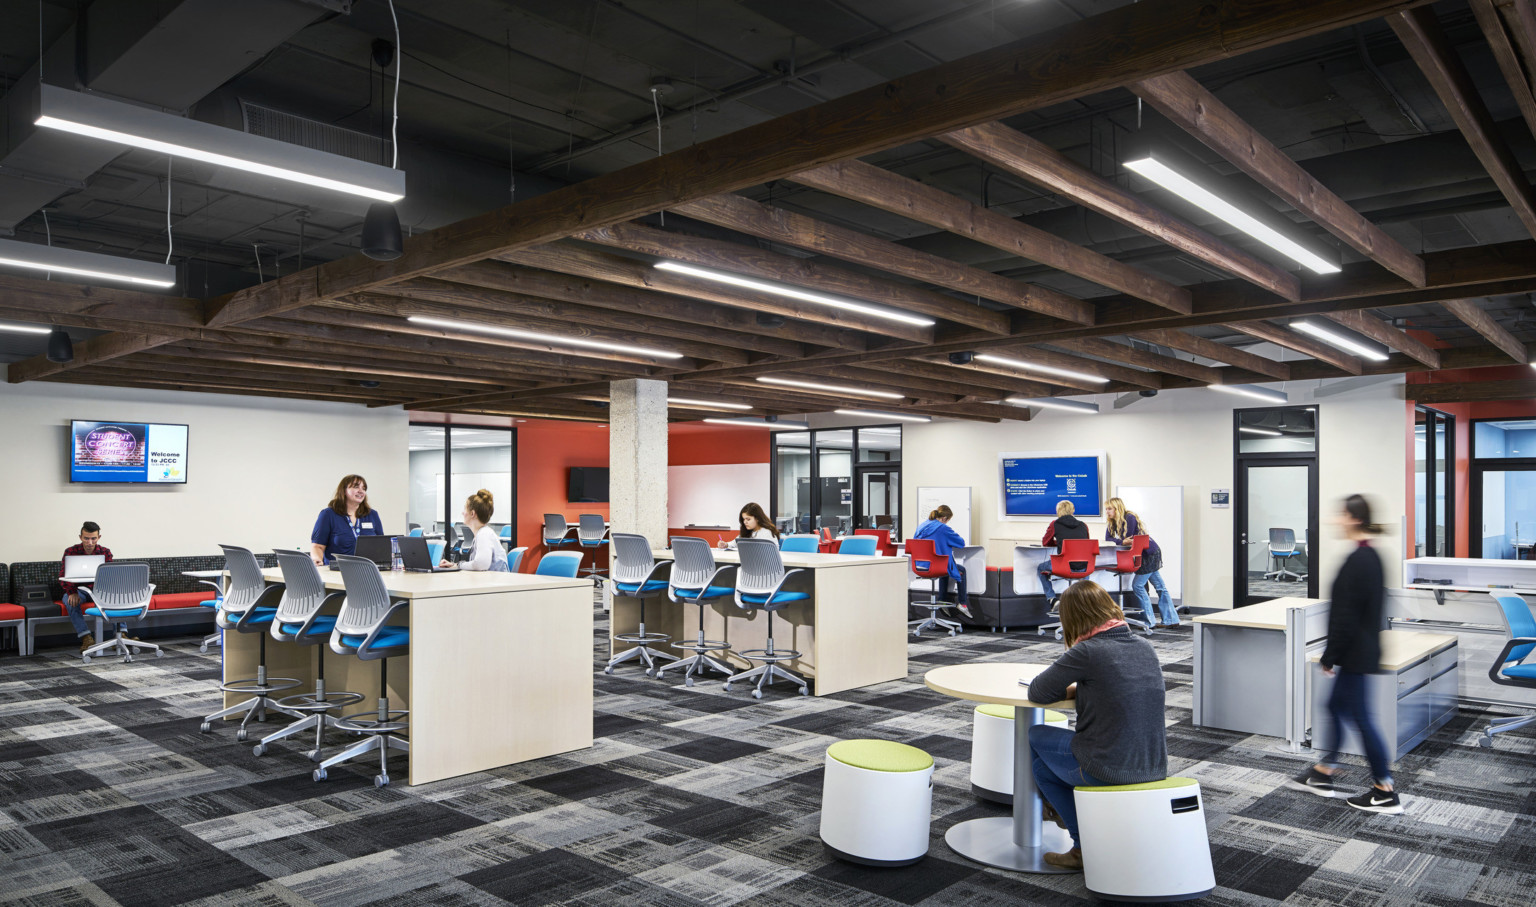 multiple student collaboration areas with flexible seating under wood panel drop ceiling accent in white room with screens